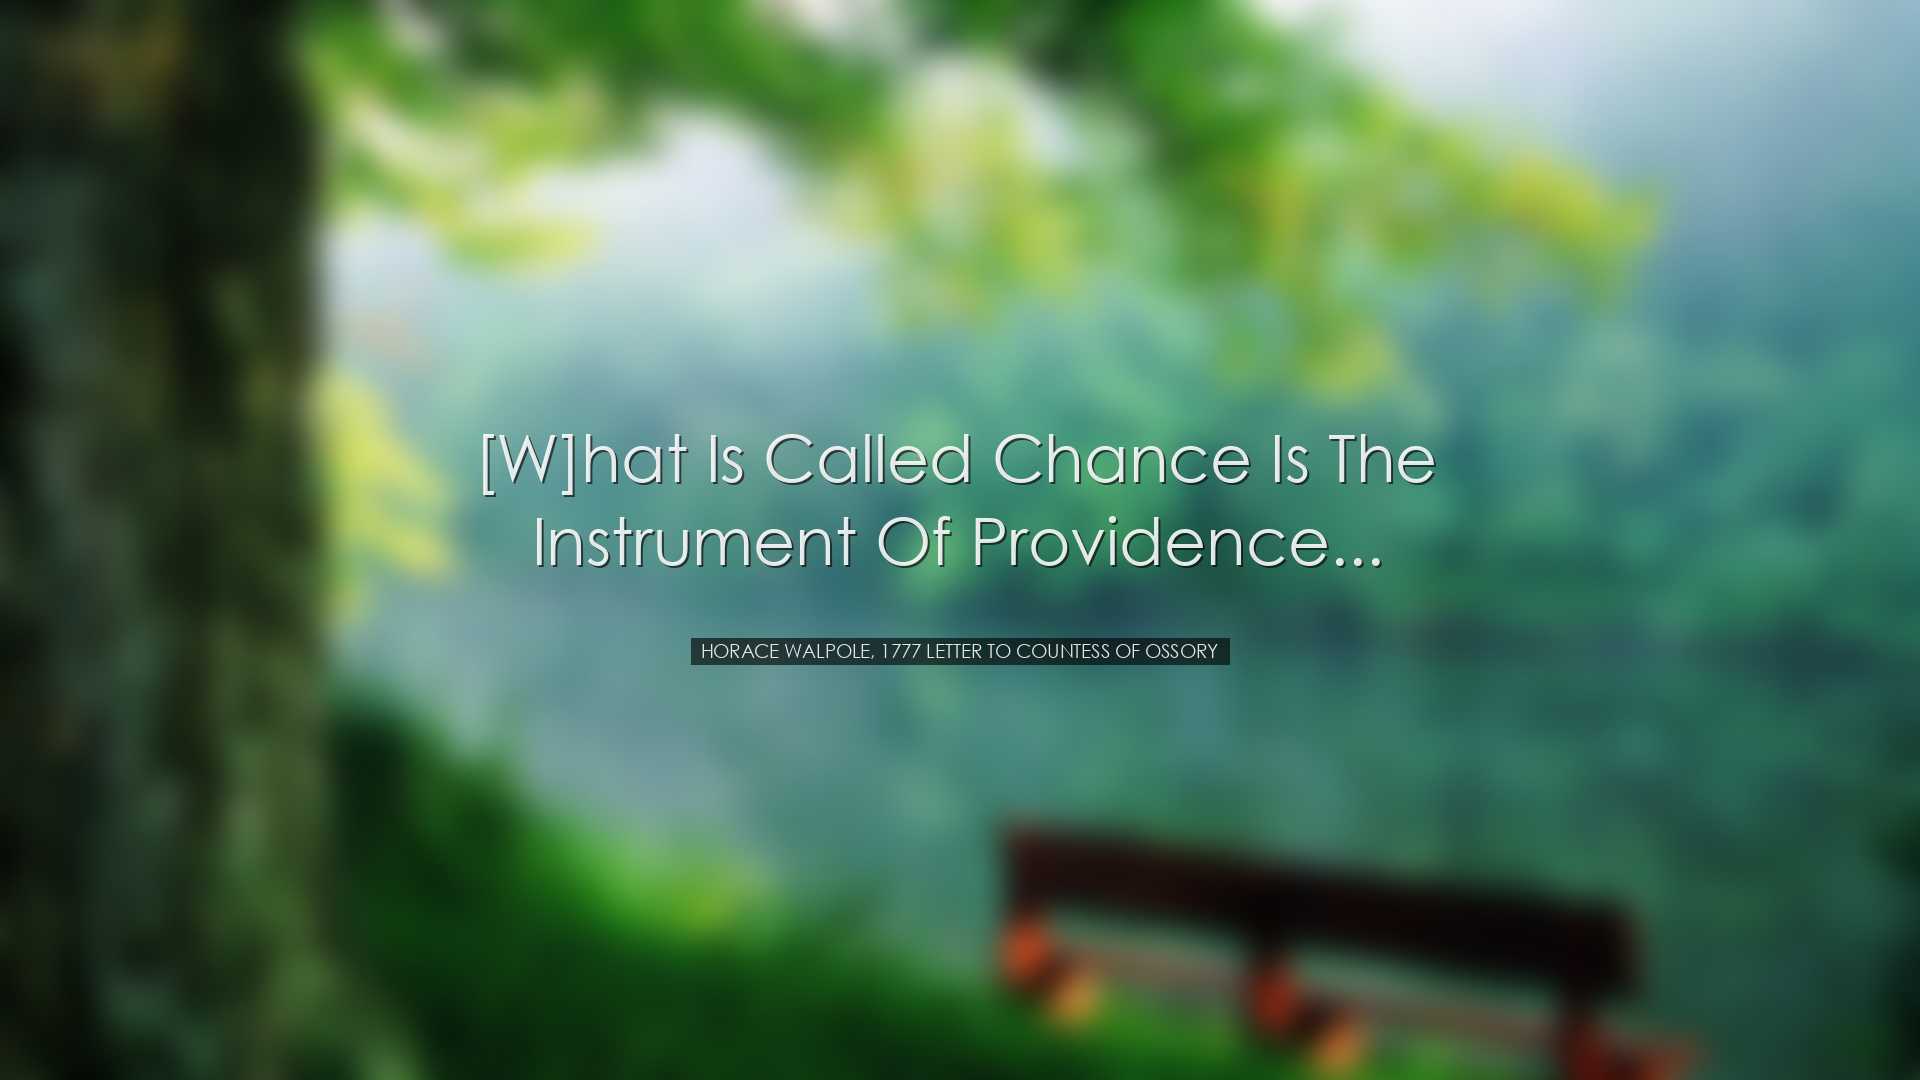 [W]hat is called chance is the instrument of Providence... - Horac